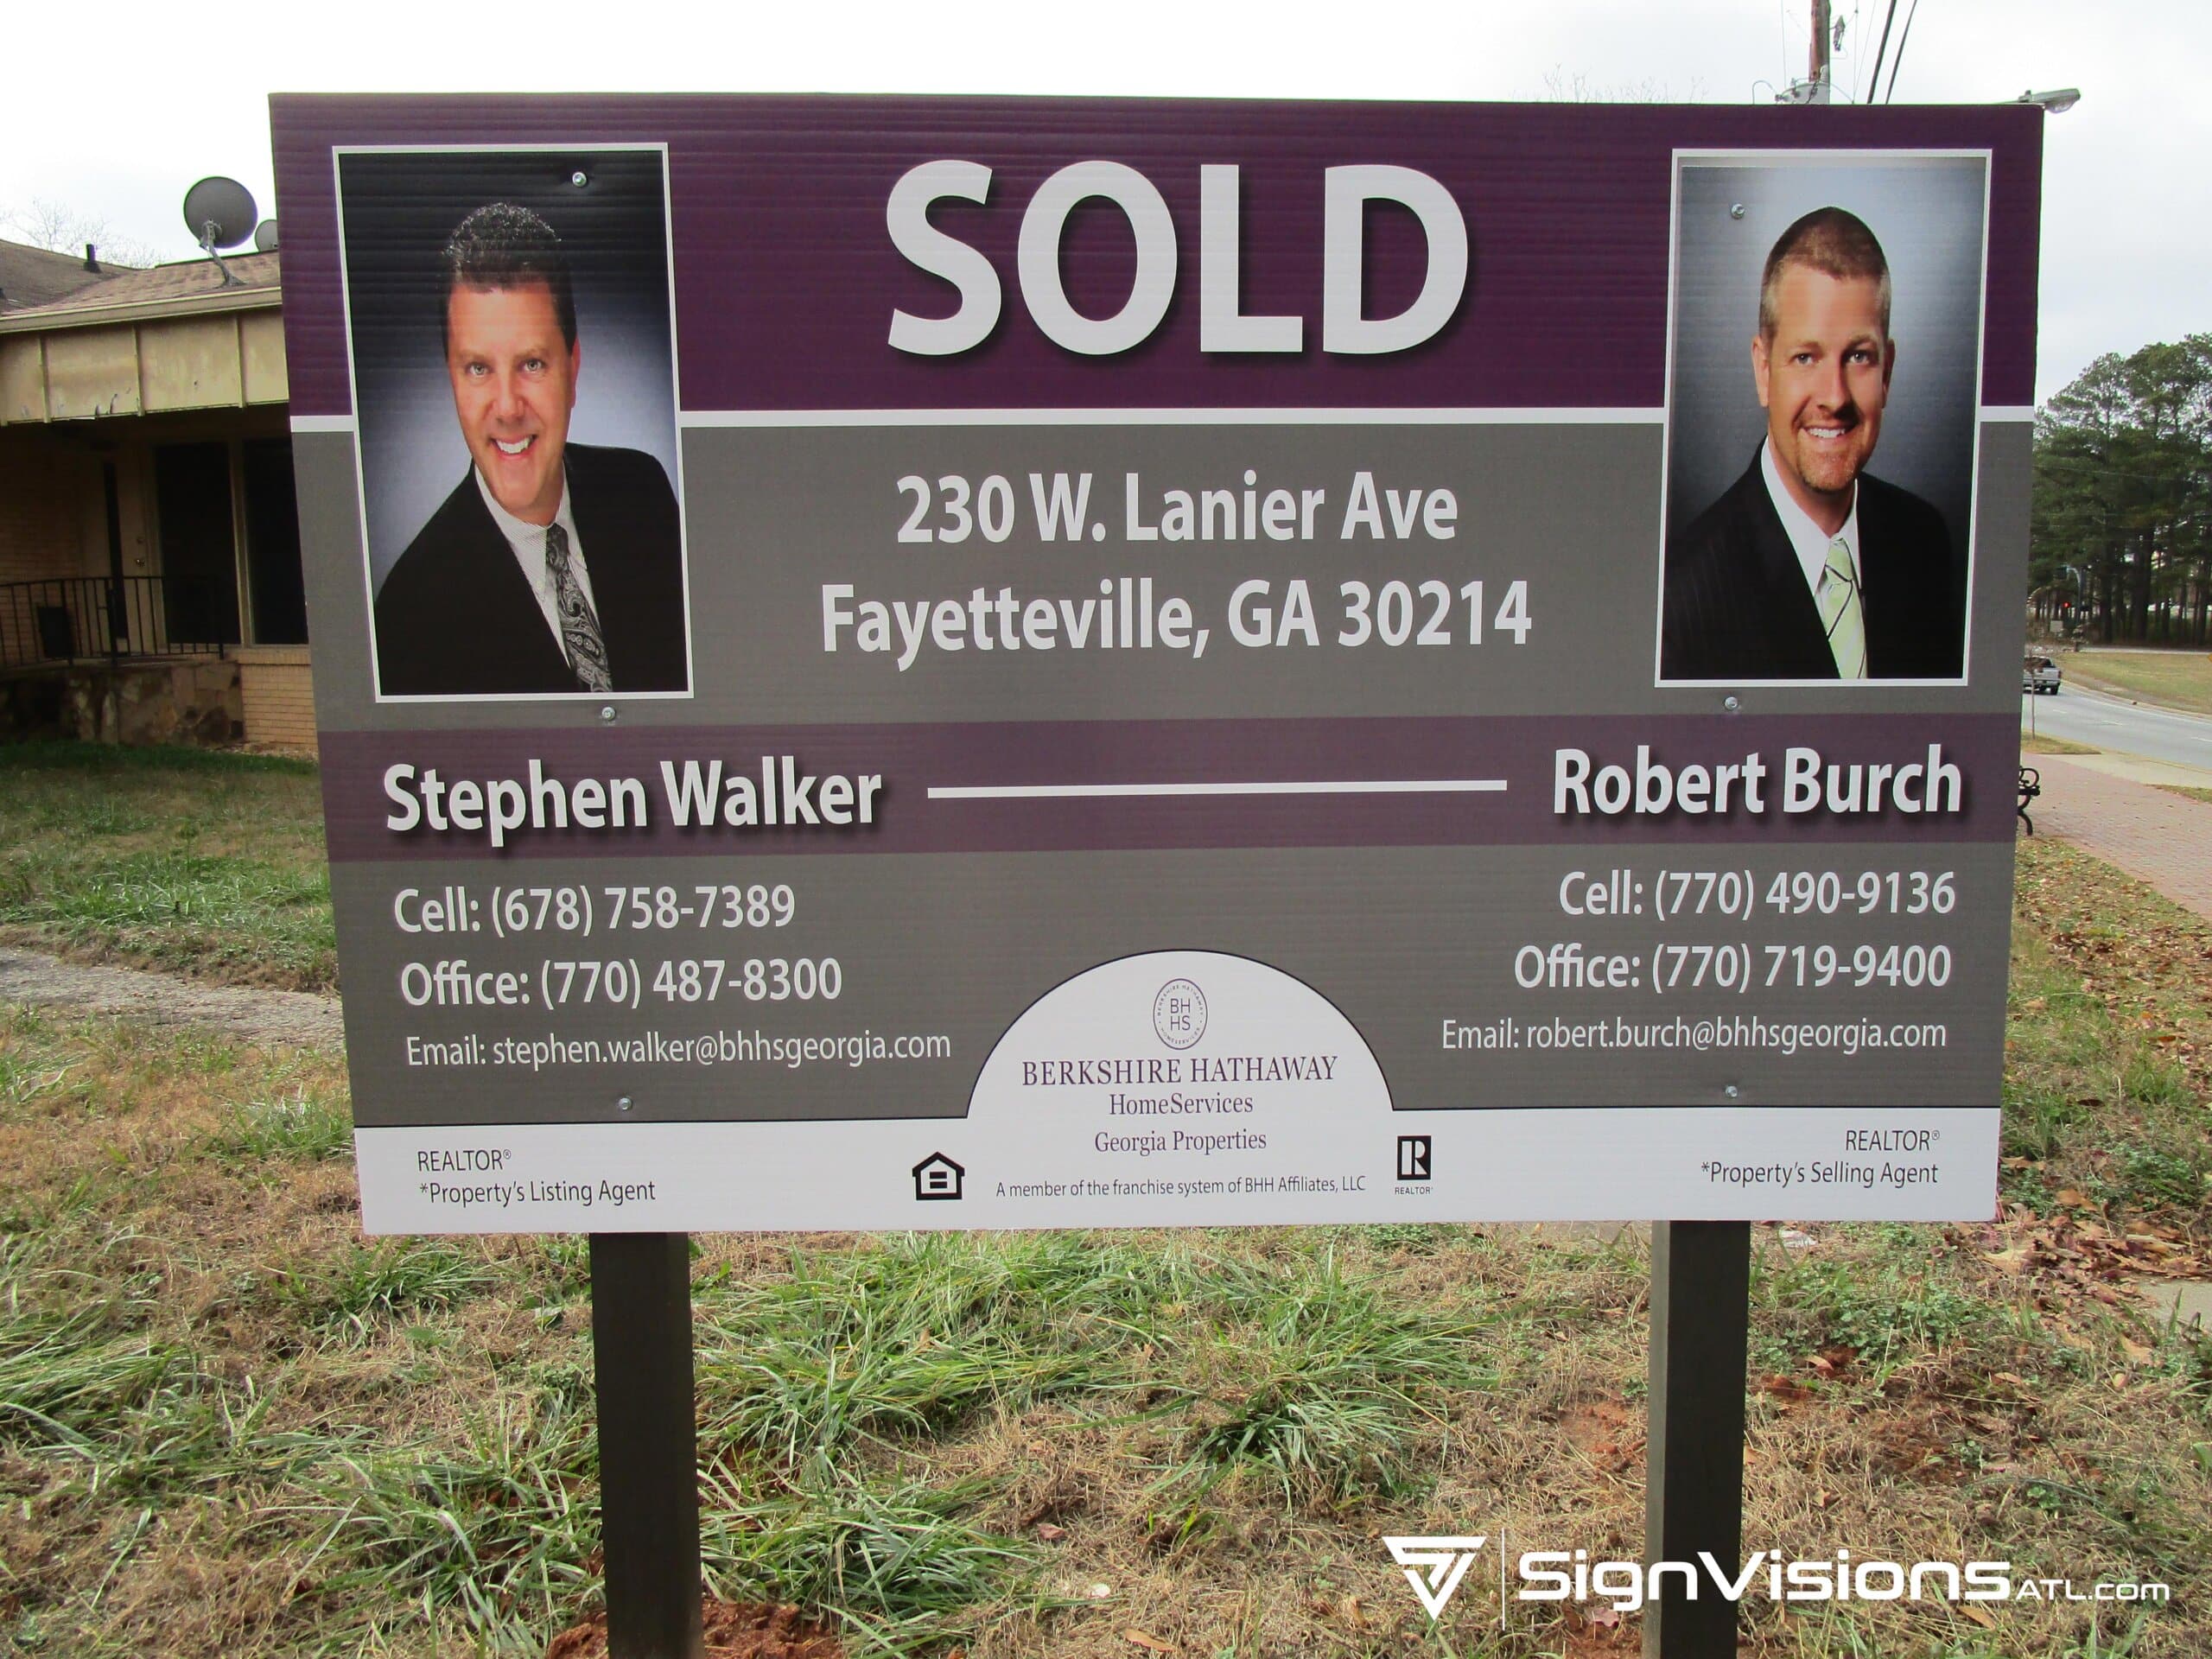 Commercial Real Estate Signs in Fayetteville GA